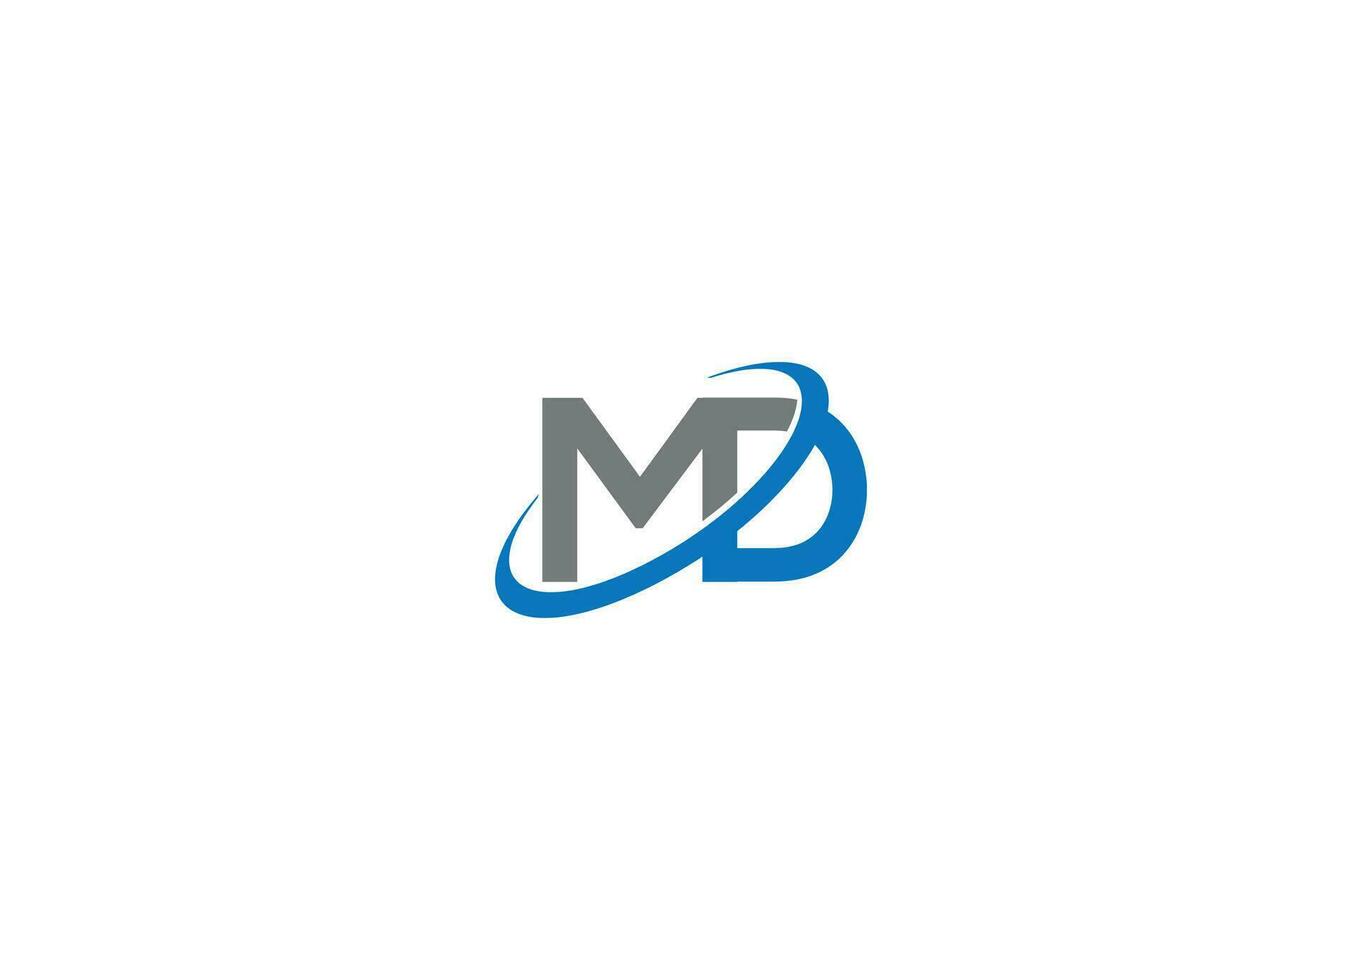 MD letter Logo Design with Creative Modern vector icon template